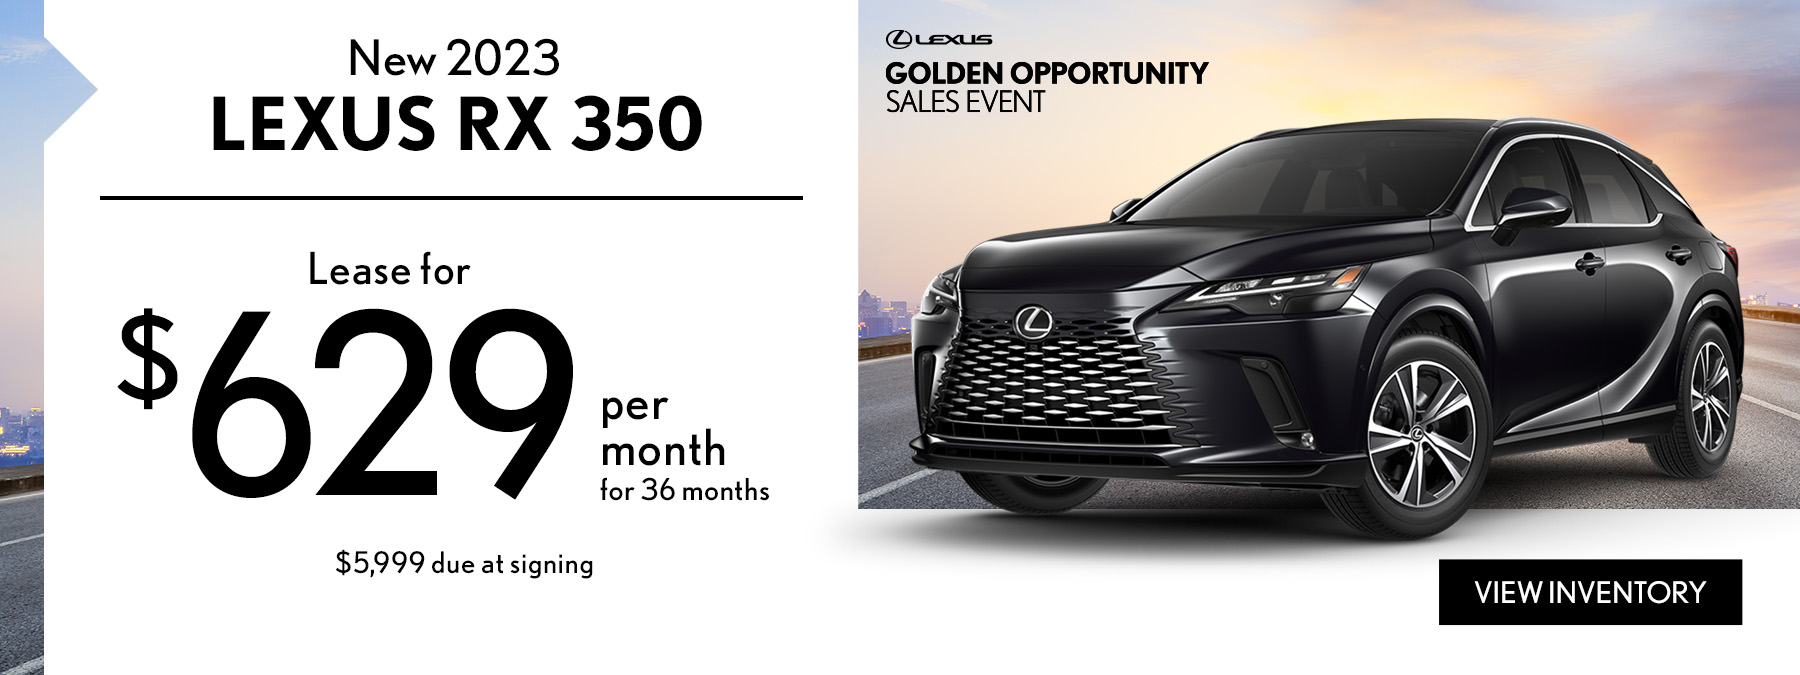 Get the latest Lexus offers and discounts on new vehicles at Lexus of